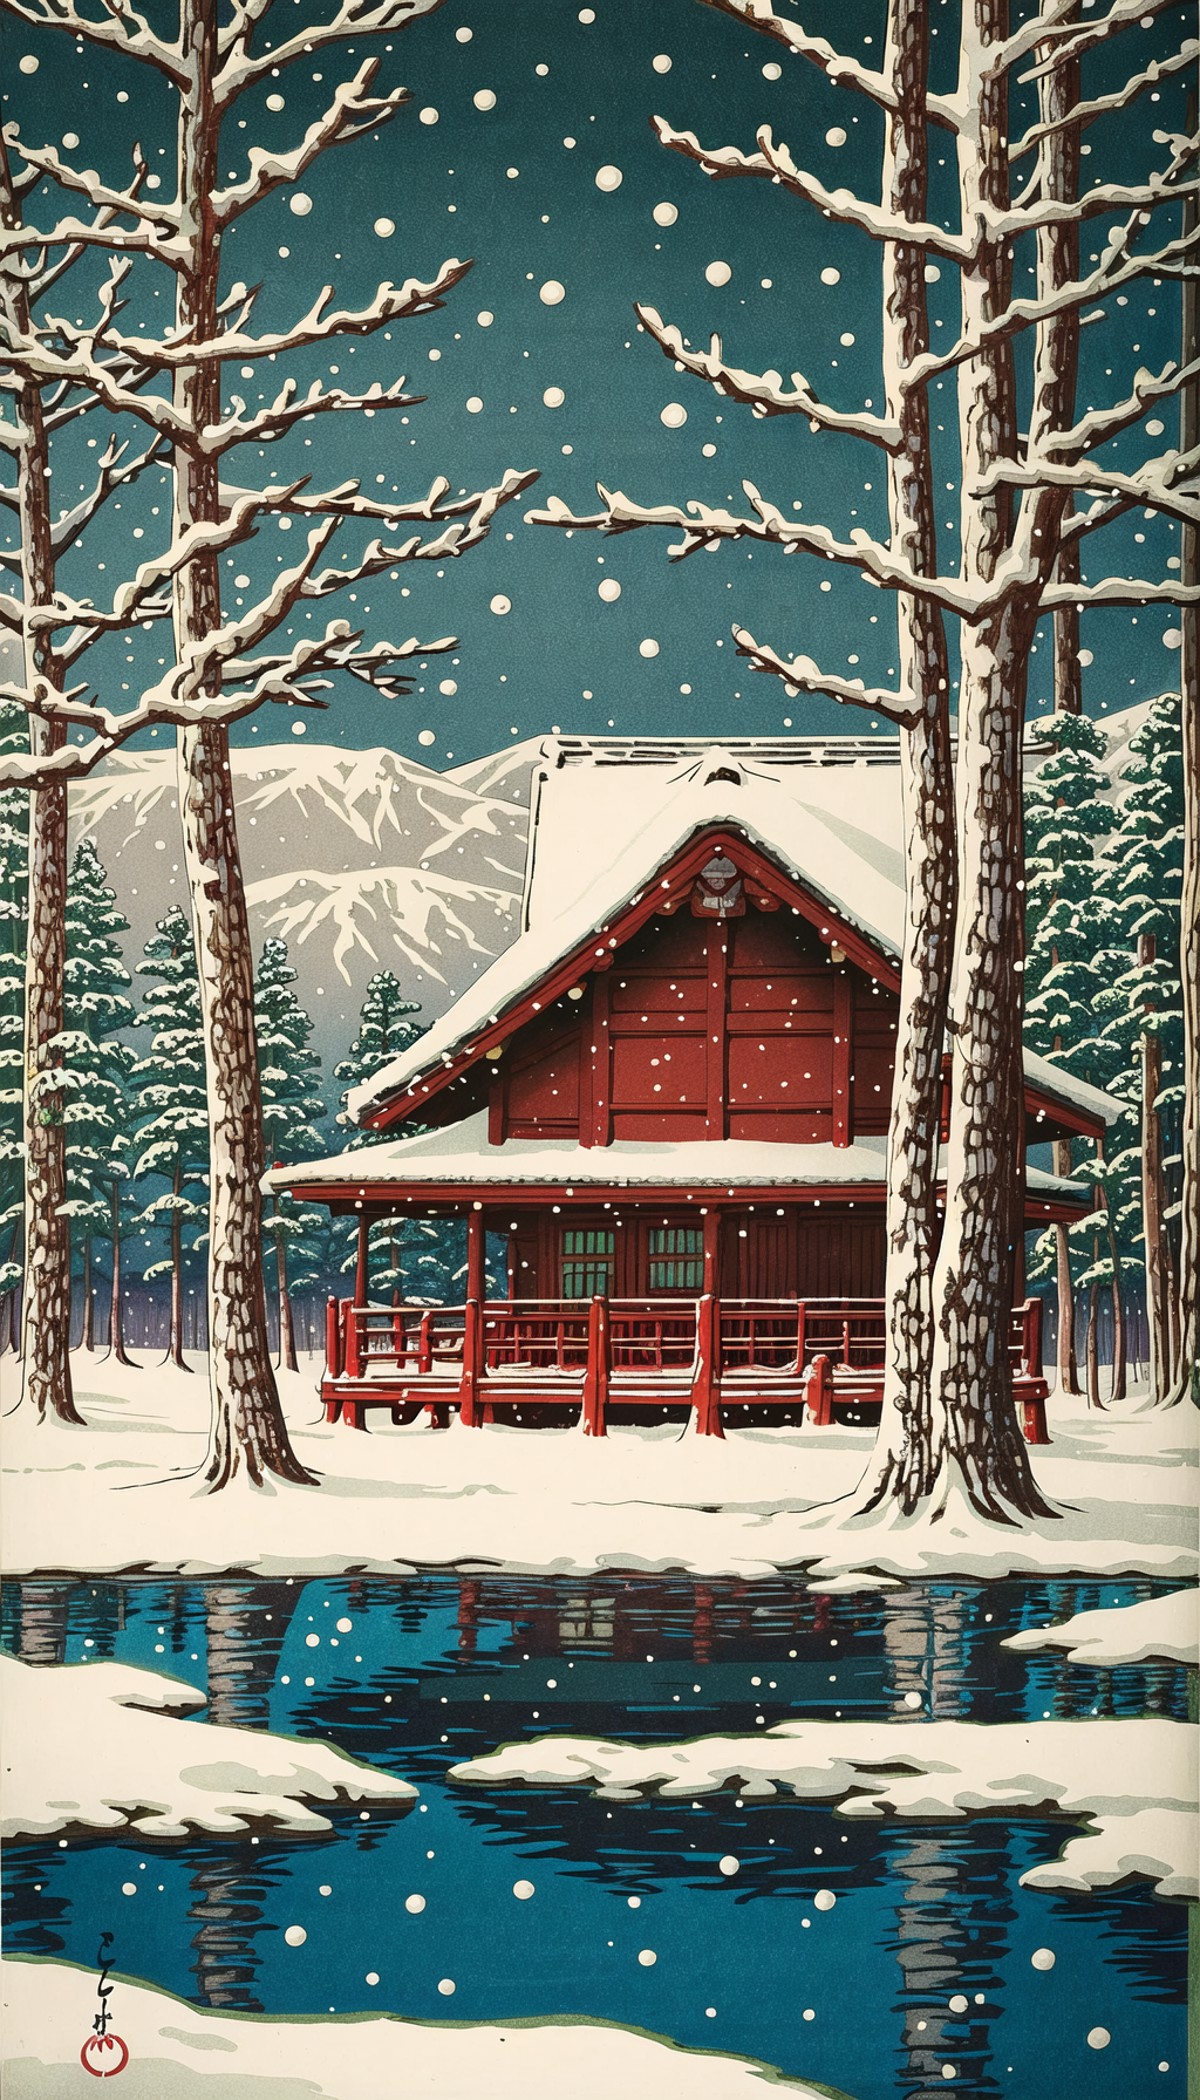 <lora:Ukiyo-e:0.65>, ukiyo-e, A hidden cabin in a snowy forest, surrounded by tall, snow-capped trees and a sense of tranq...